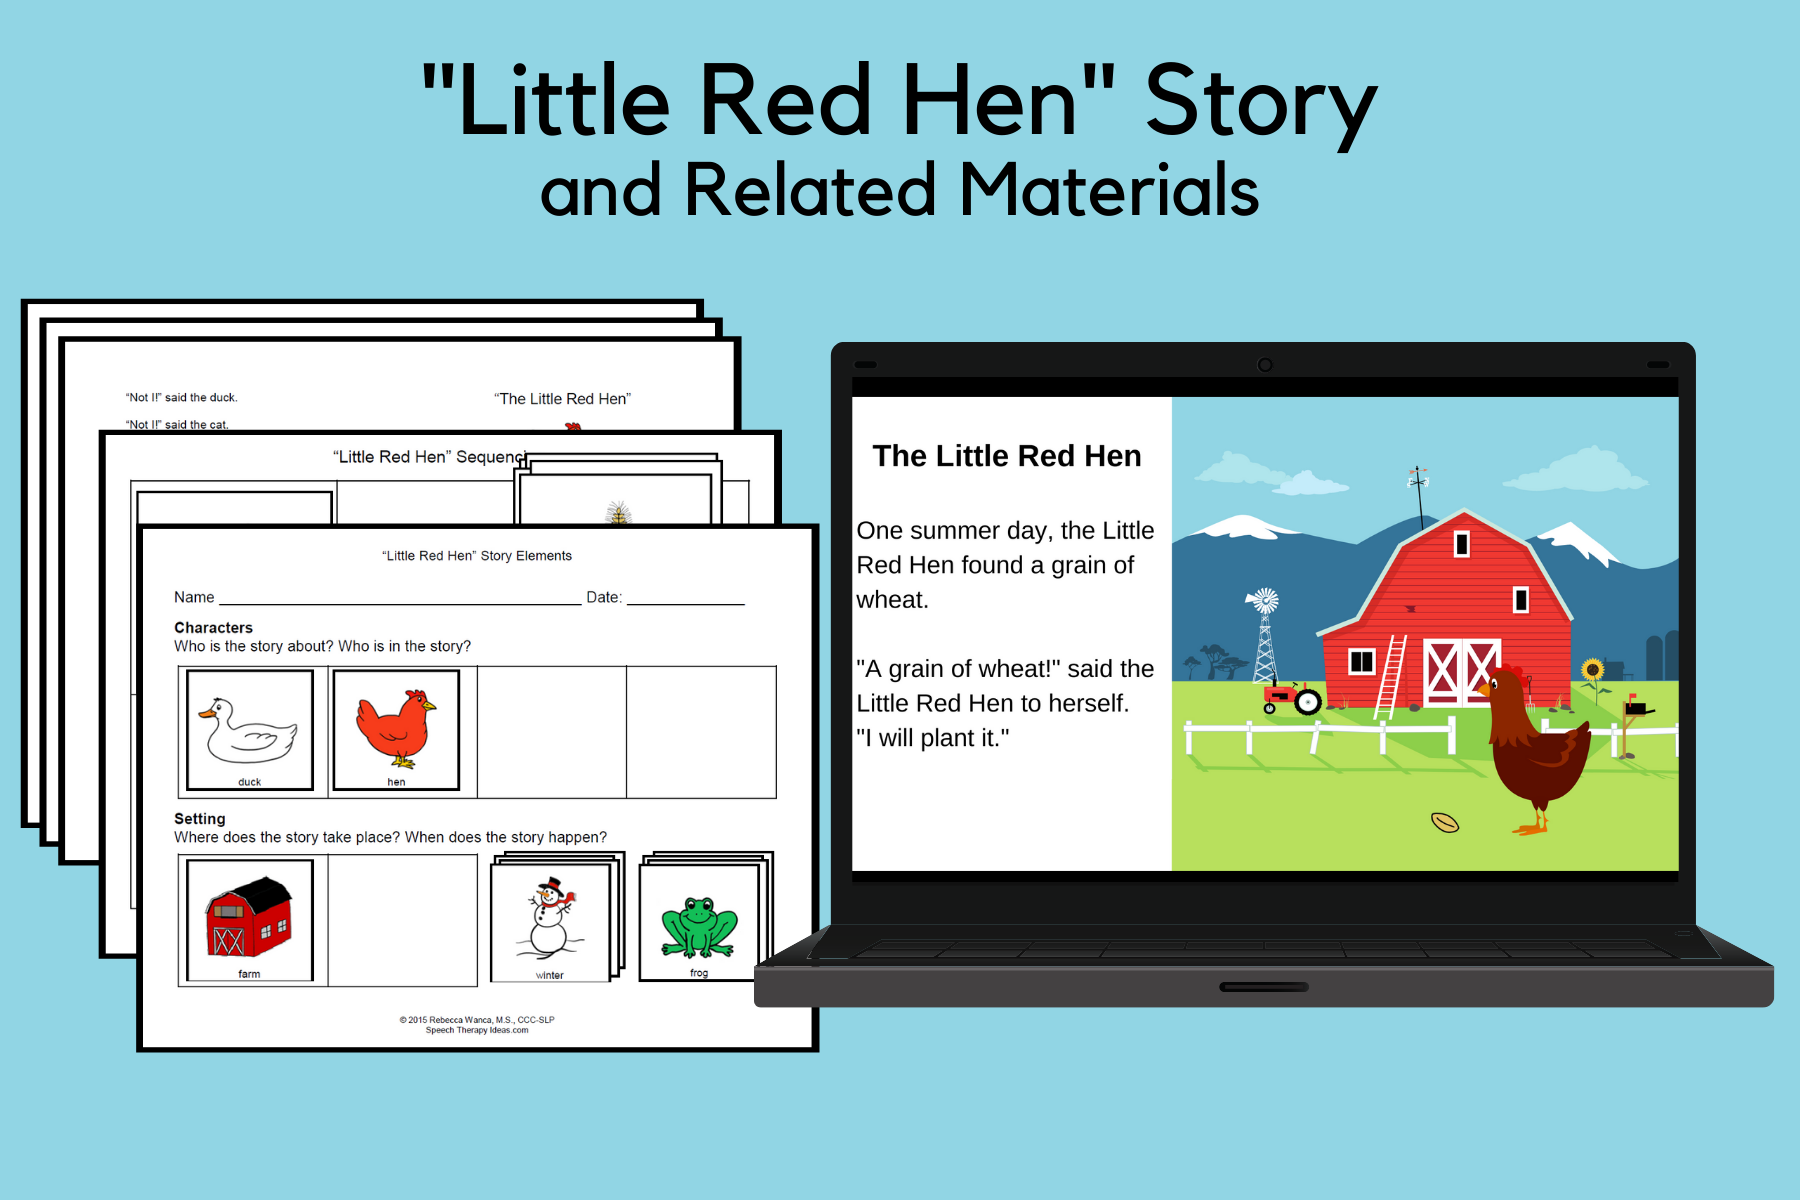 “Little Red Hen” Story and Related Materials